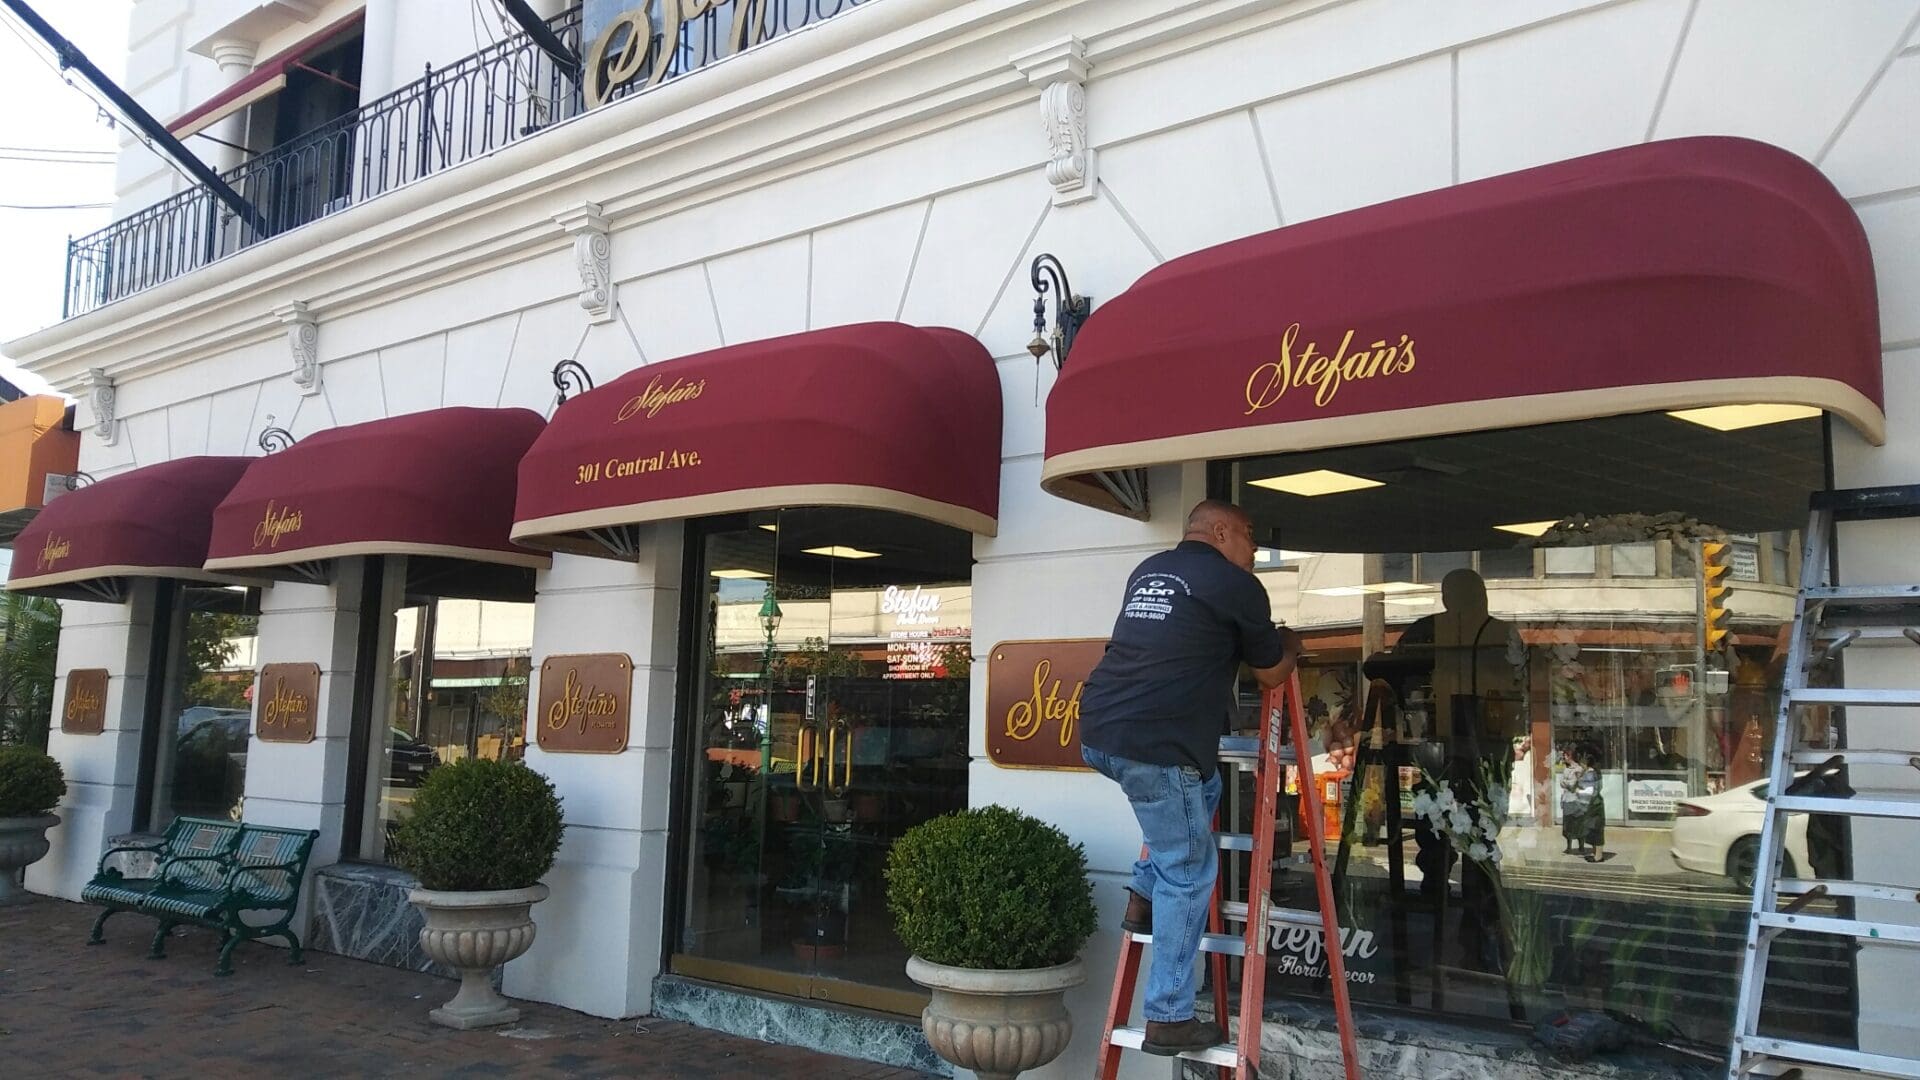 A worker on a ladder adjusts the awning of 